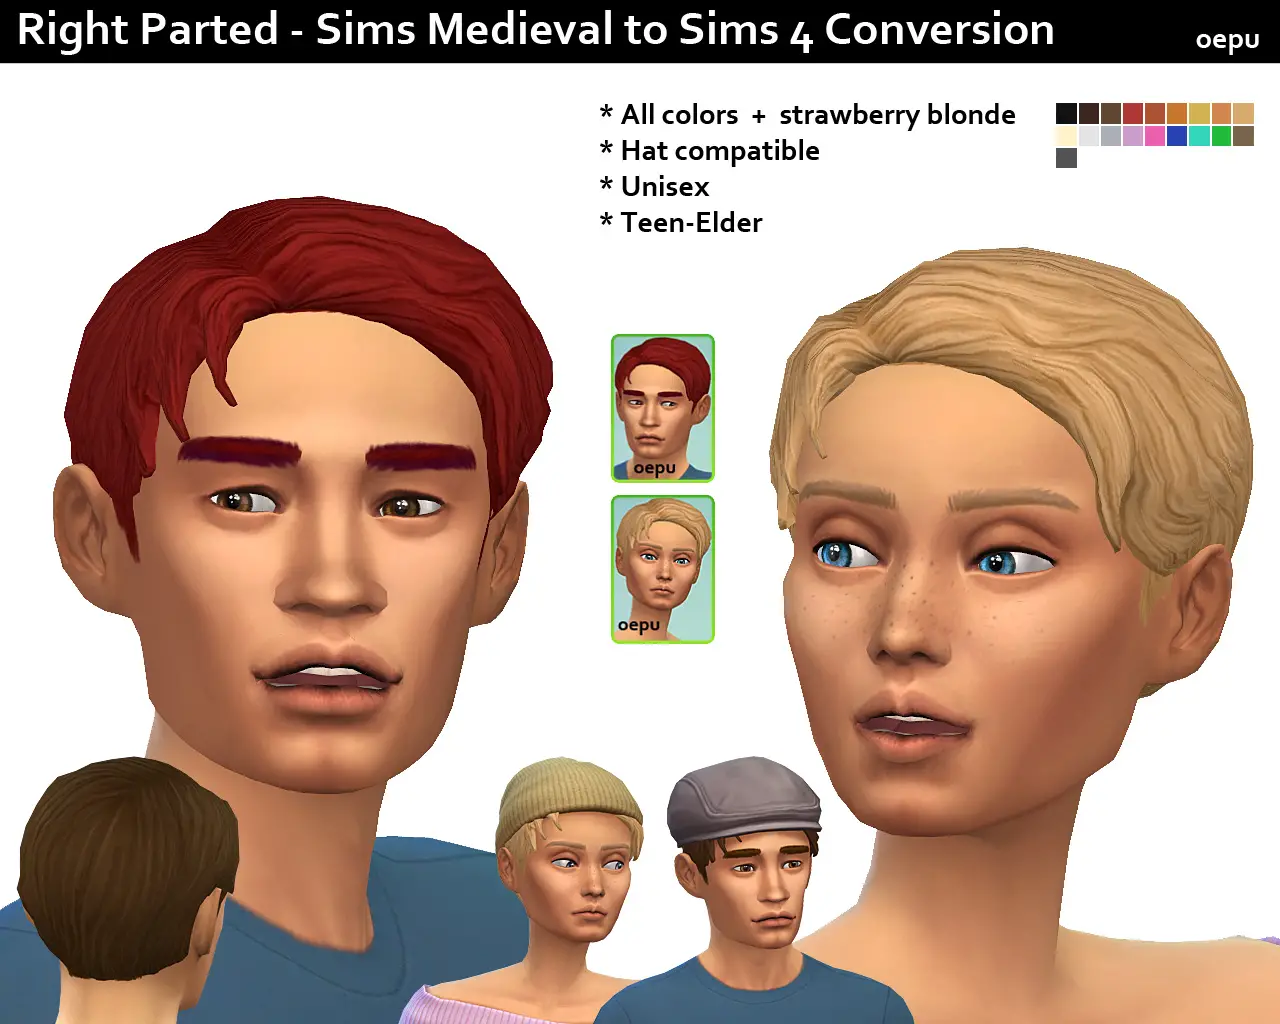 the sims medieval custom content